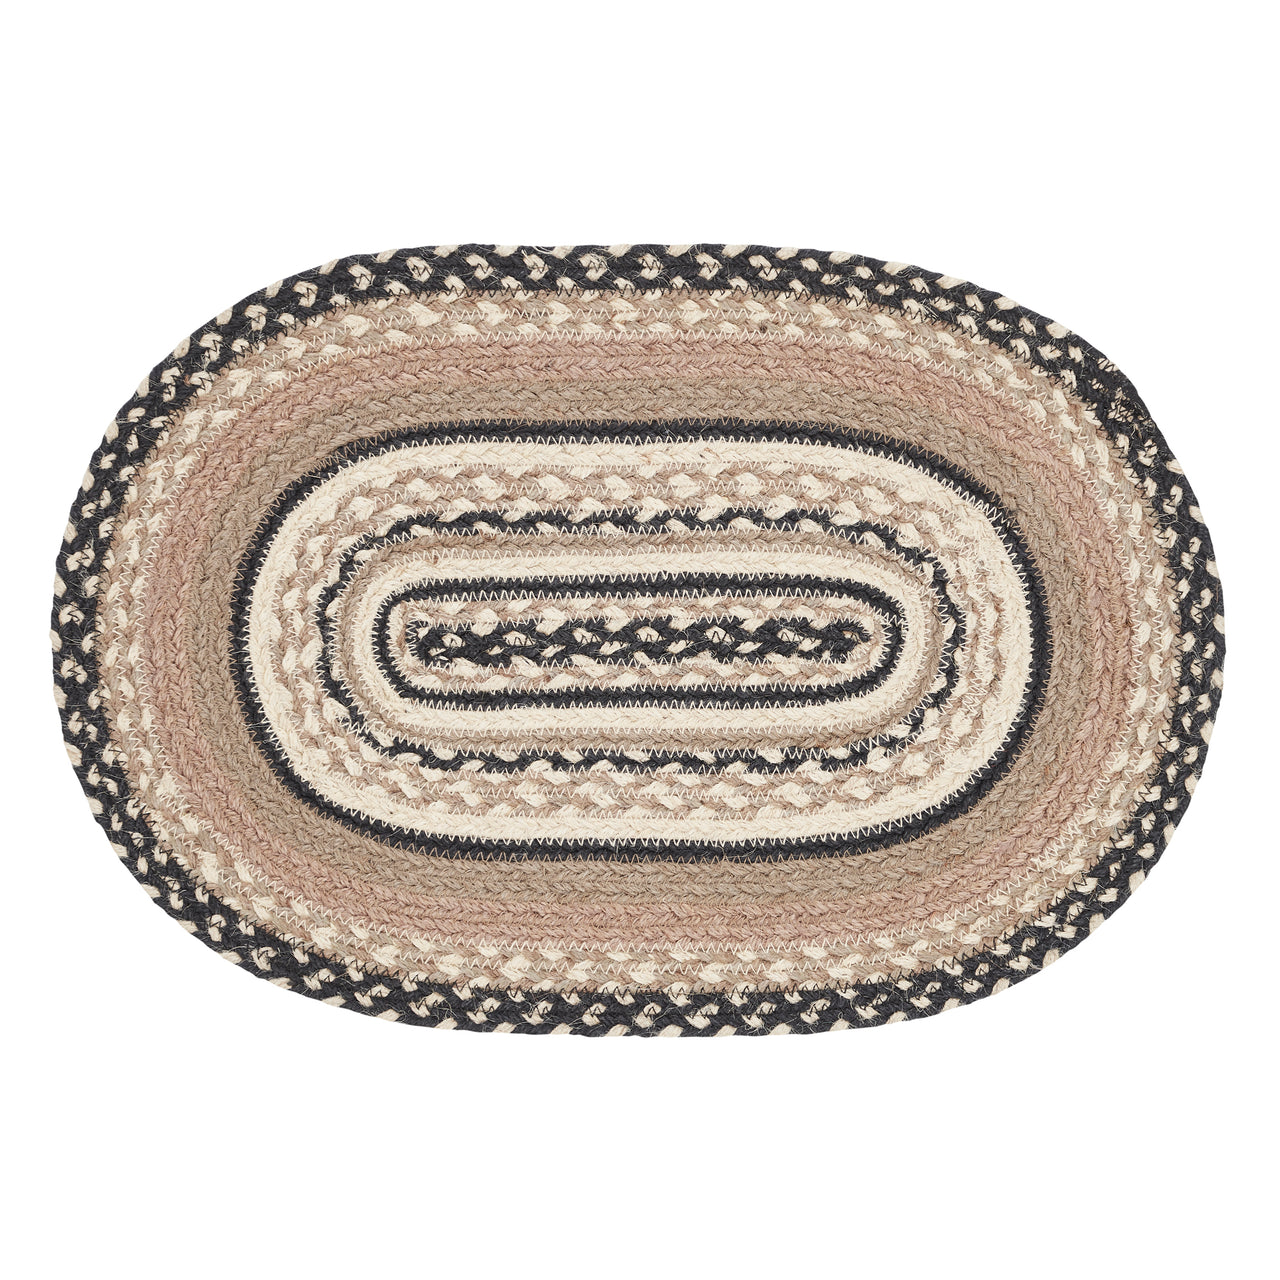 Sawyer Mill Charcoal Creme Jute Braided Oval Placemat 12"x18" VHC Brands